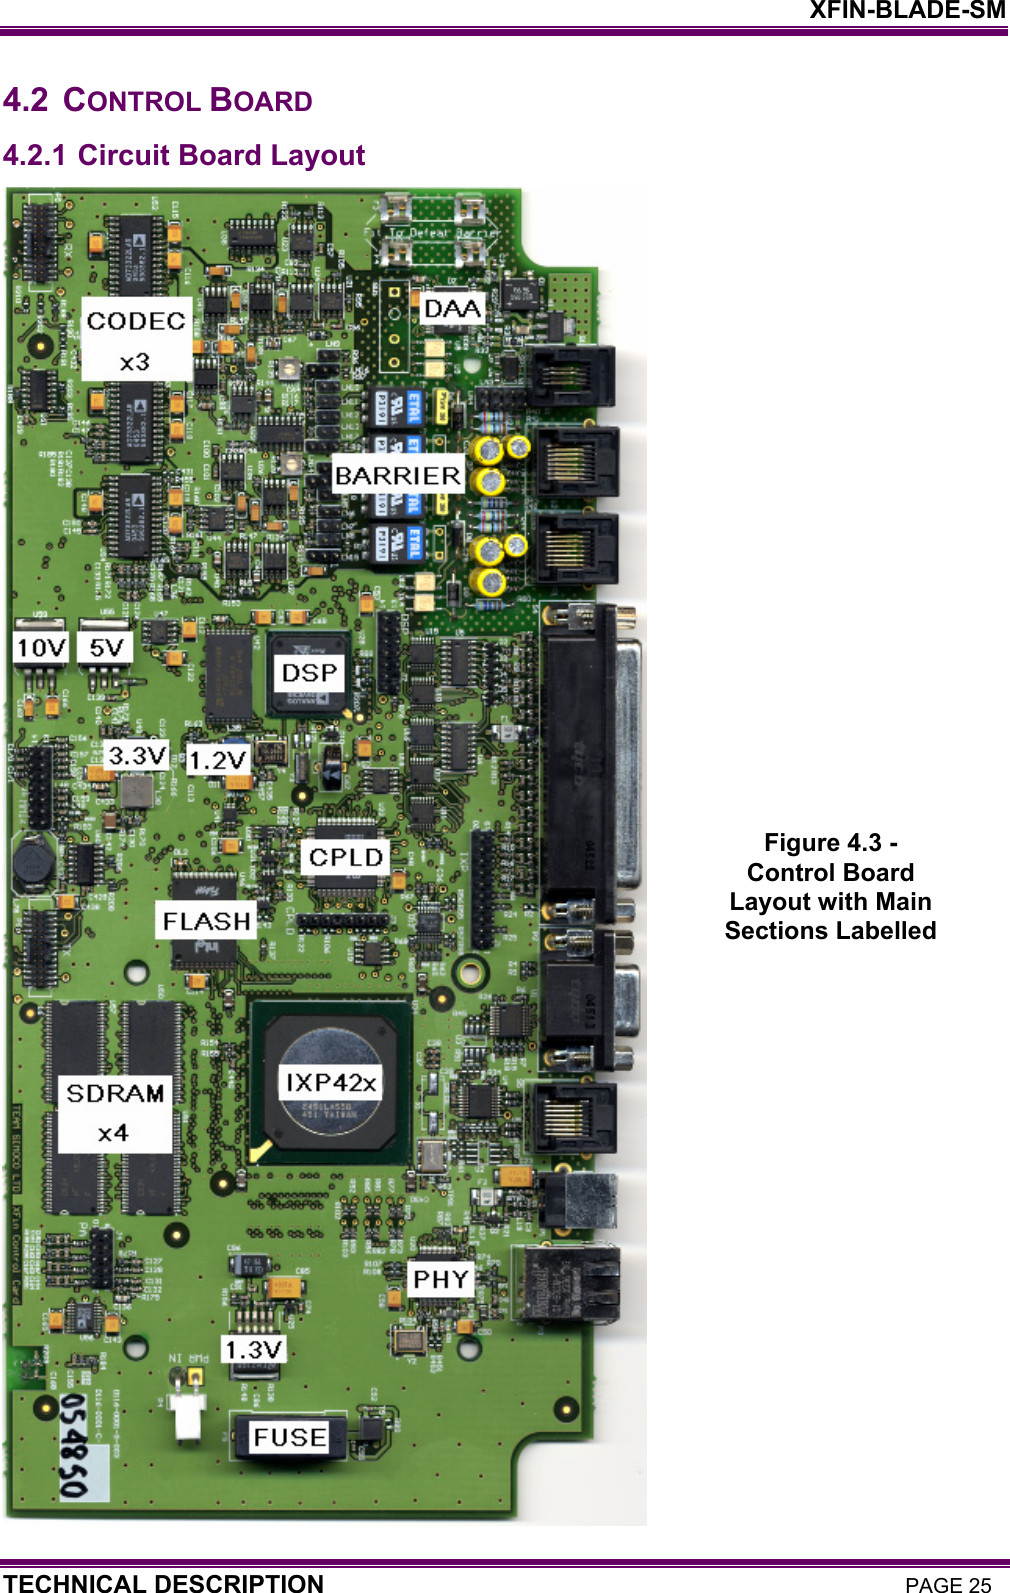    XFIN-BLADE-SM TECHNICAL DESCRIPTION PAGE 25 4.2 CONTROL BOARD 4.2.1 Circuit Board Layout  Figure 4.3 - Control Board Layout with Main Sections Labelled